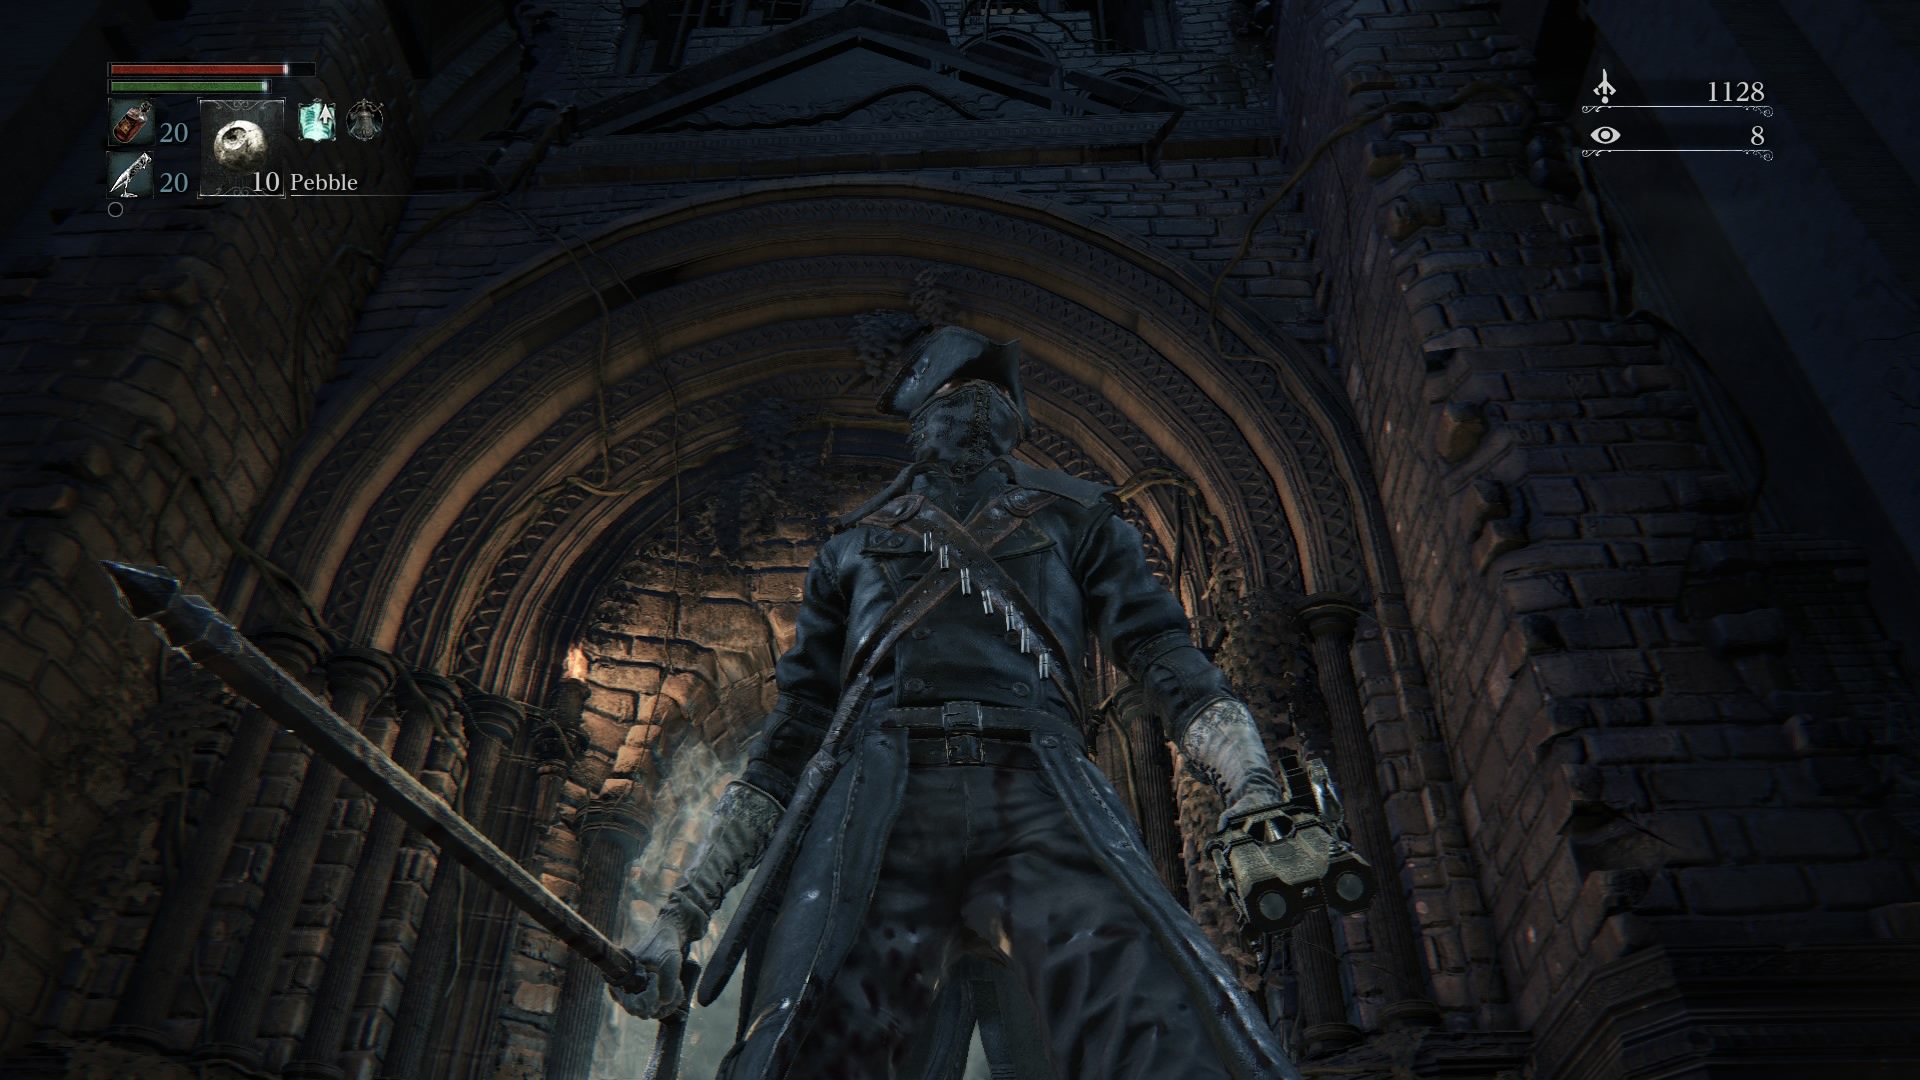 Bloodborne (PS4) review: Say hello to the most unforgiving PS4